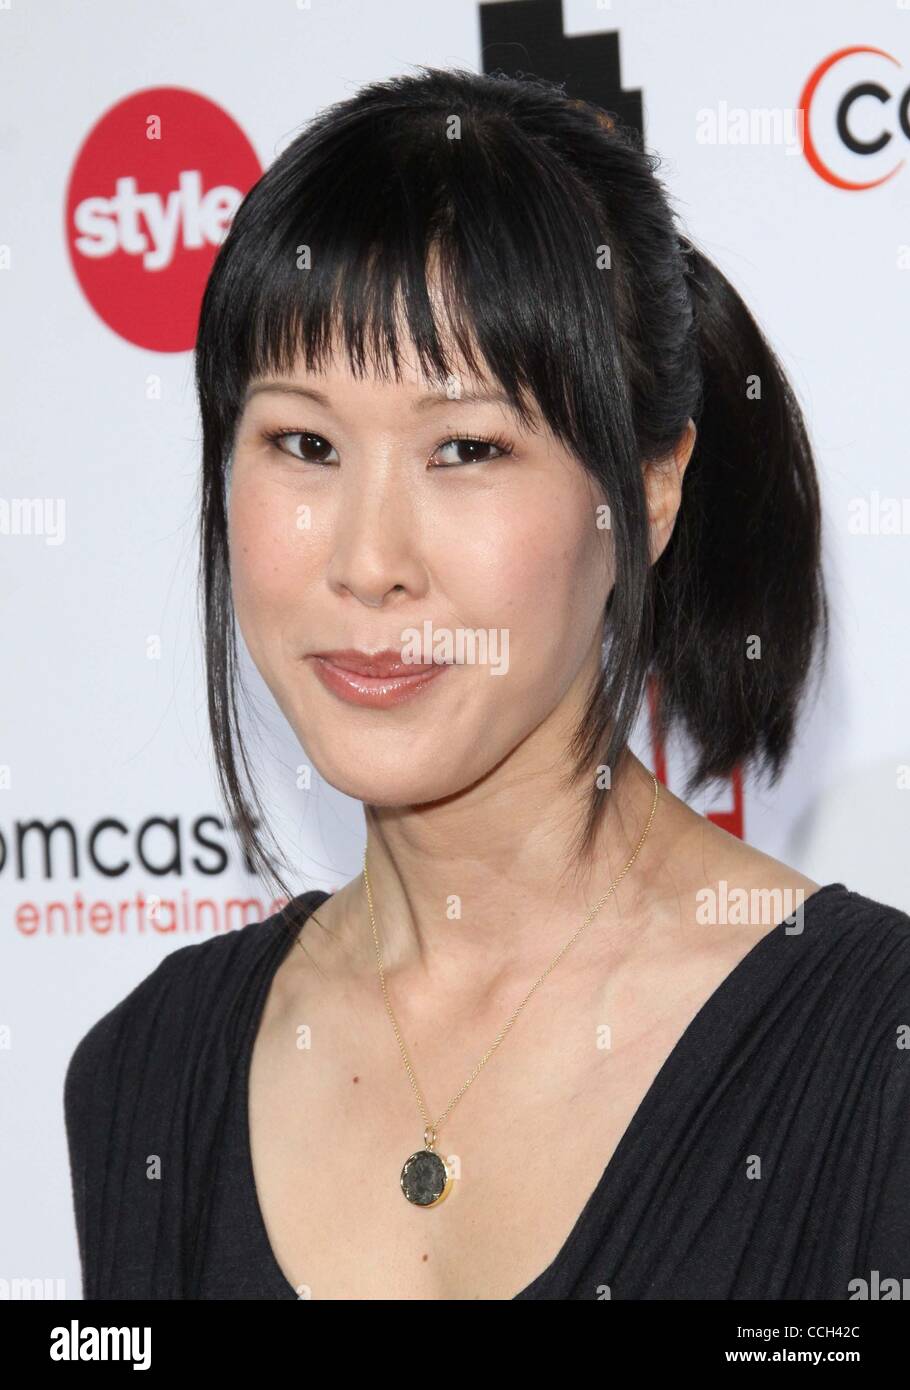 Laura ling hi-res stock photography and images - Alamy